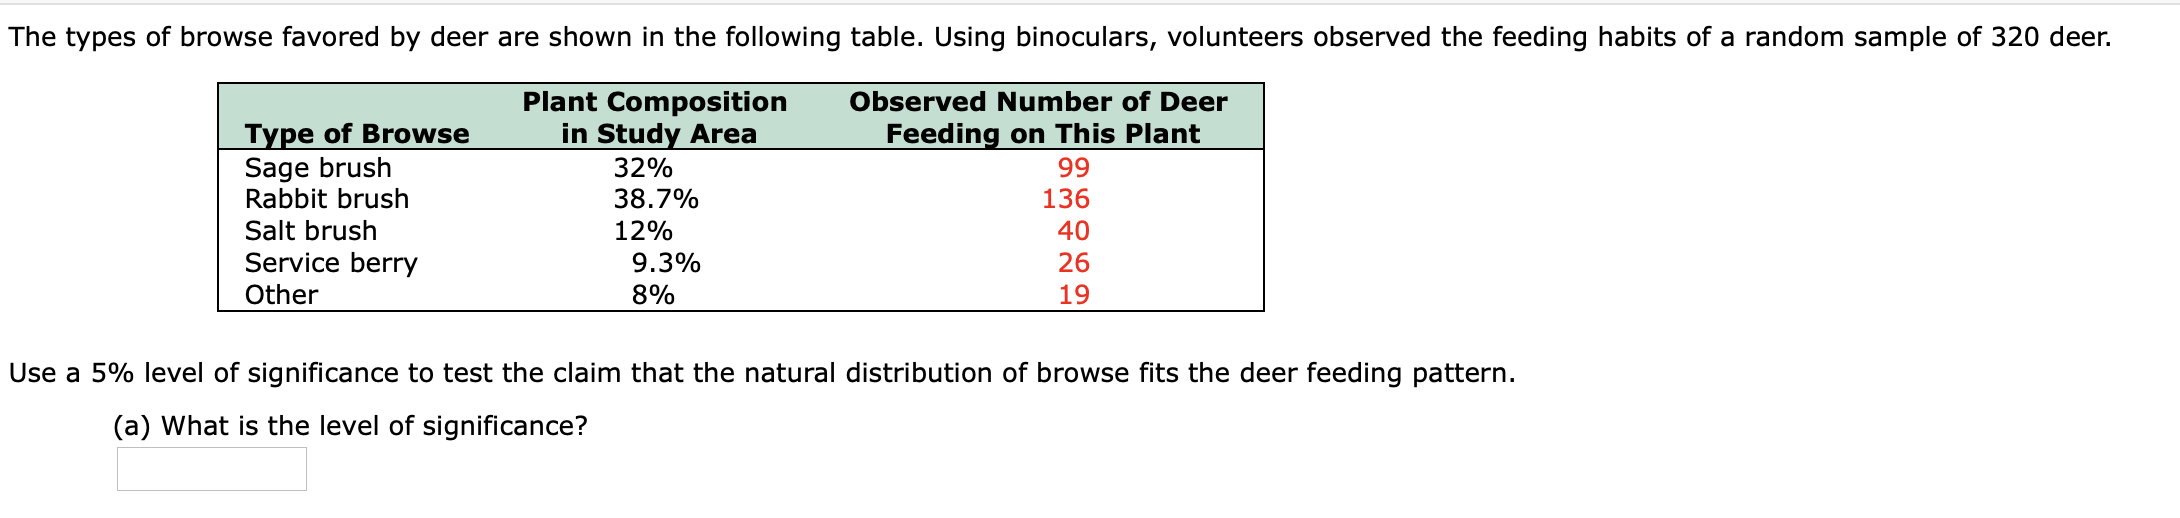 he types of browse favored by deer are shown in the following table. Using binoculars, volunteers observed the feeding habits of a random sample of 320 deer.
Plant Composition
in Study Area
32%
38.7%
12%
Observed Number of Deer
Feeding on This Plant
Type of Browse
Sage brush
Rabbit brush
Salt brush
Service berry
Other
99
136
40
26
19
9.3%
Jse a 5% level of significance to test the claim that the natural distribution of browse fits the deer feeding pattern.
(a) What is the level of significance?
